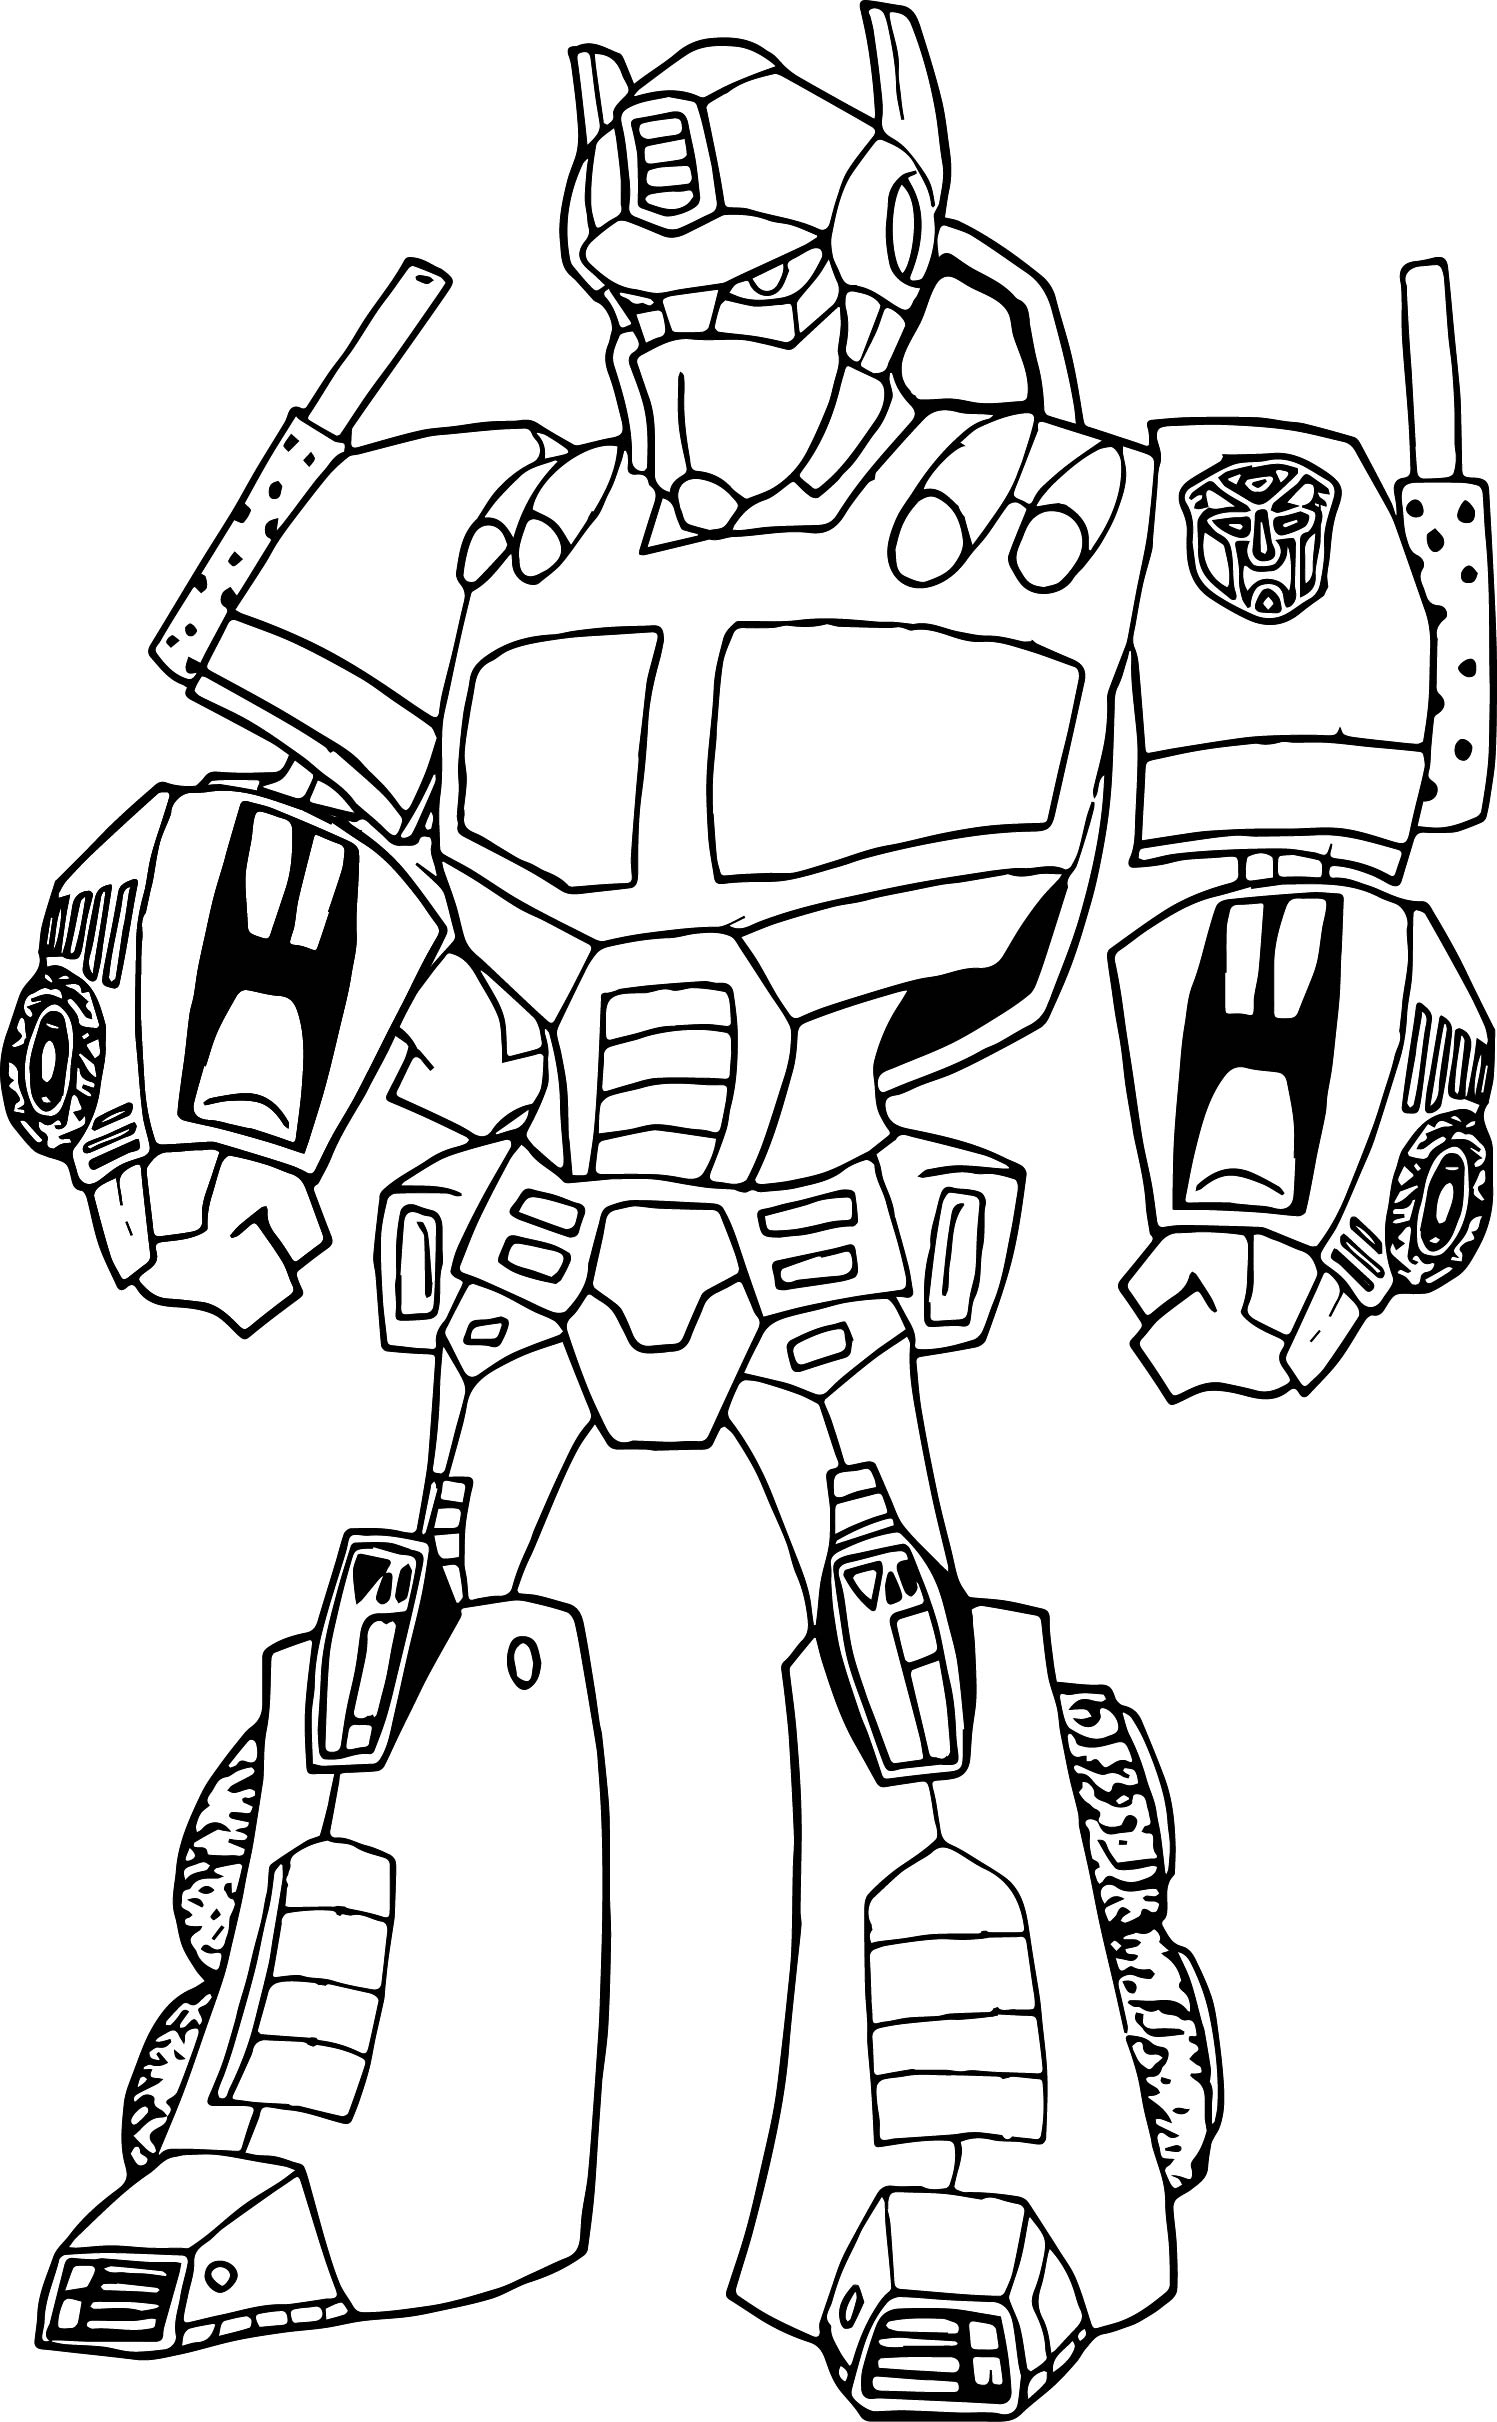 Cool Robot Coloring Pages At Getcolorings | Free ganzes Coloriage Dessin Robot